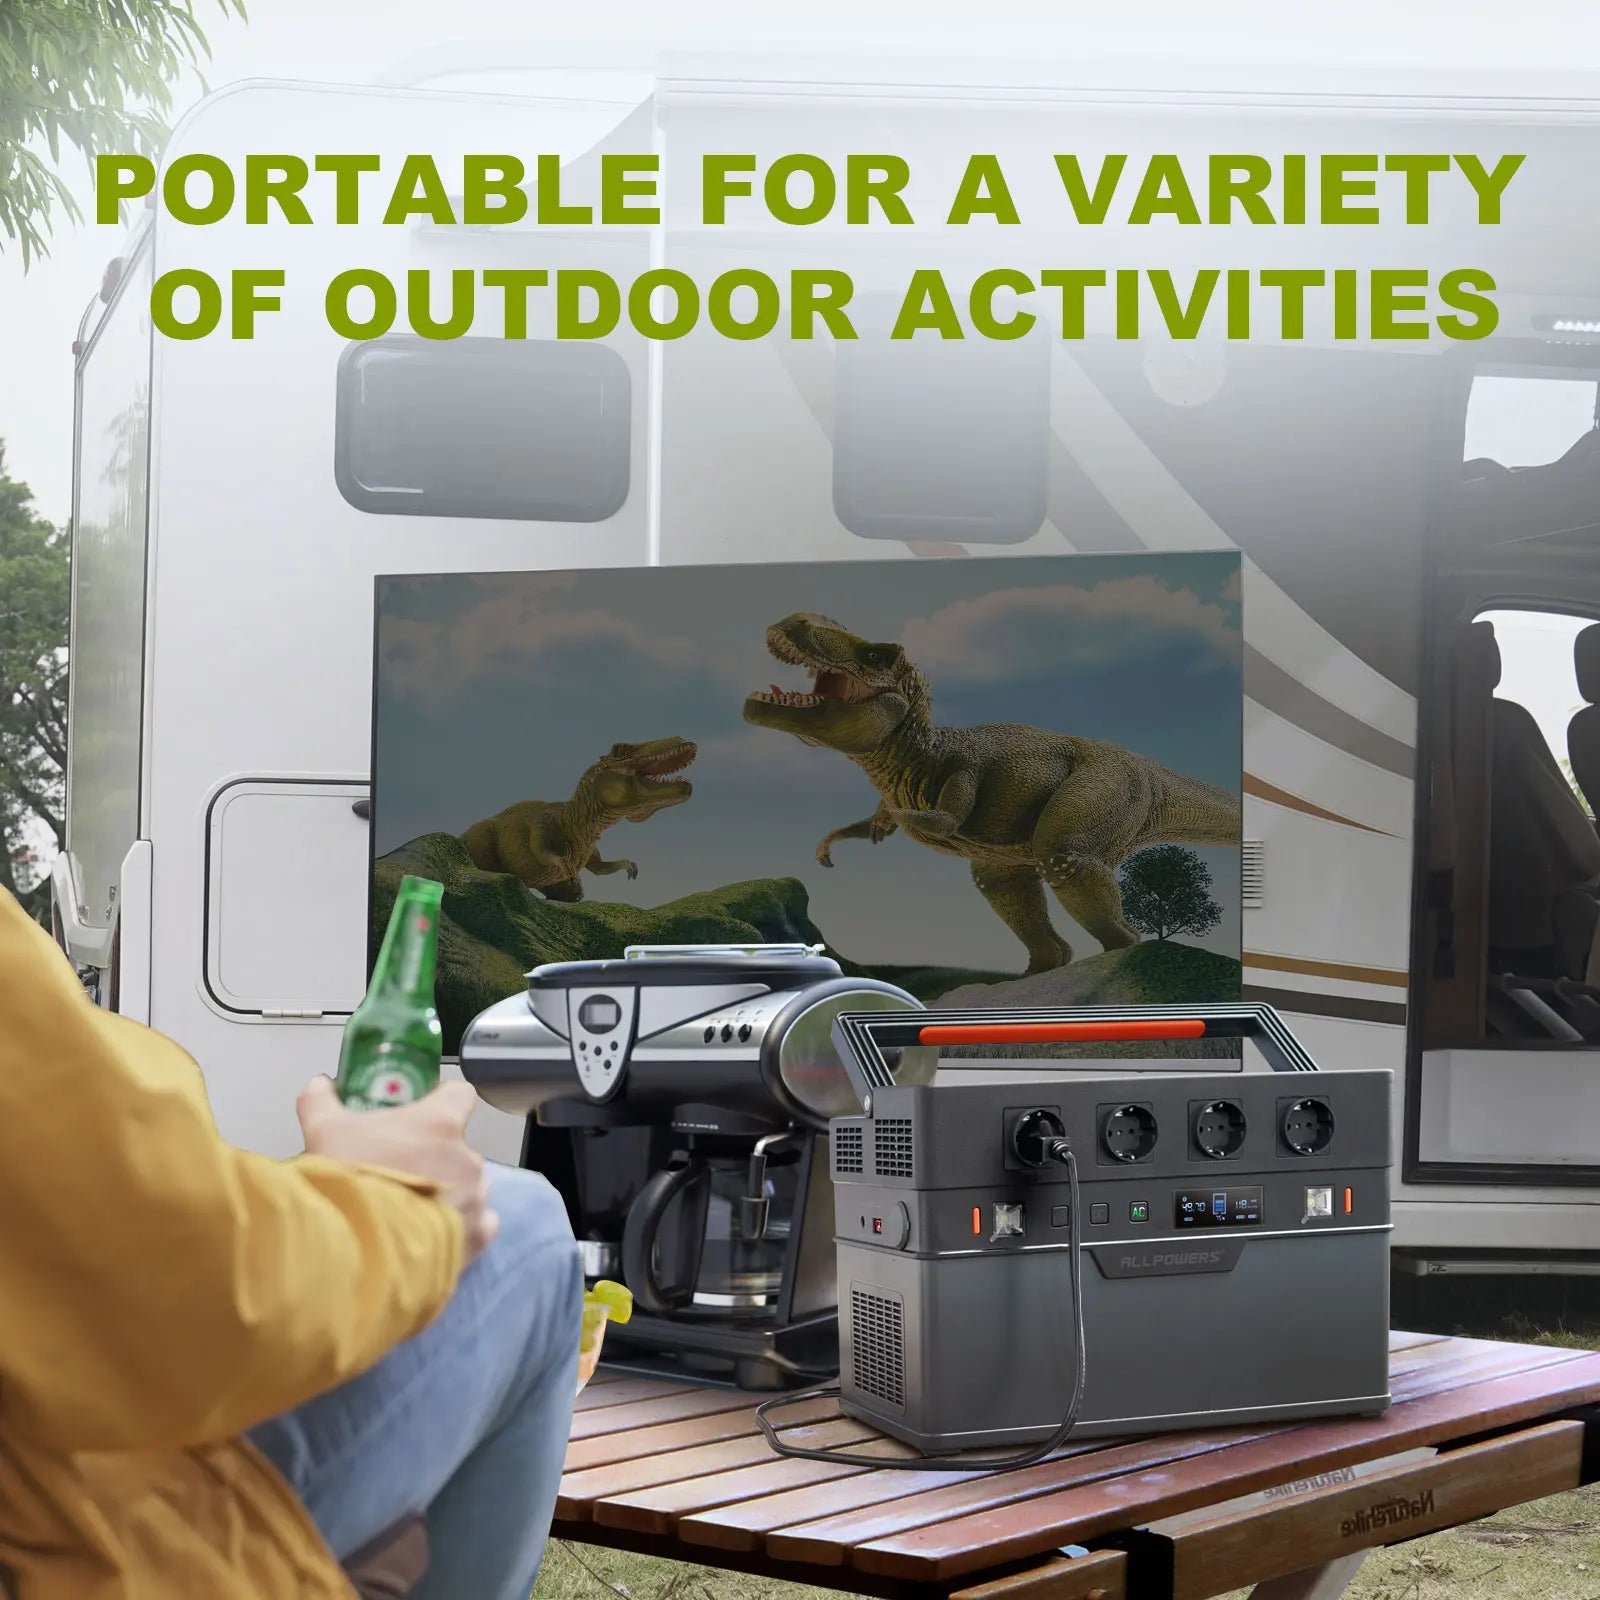 Portable power source for camping, RVing, and outdoor adventures.